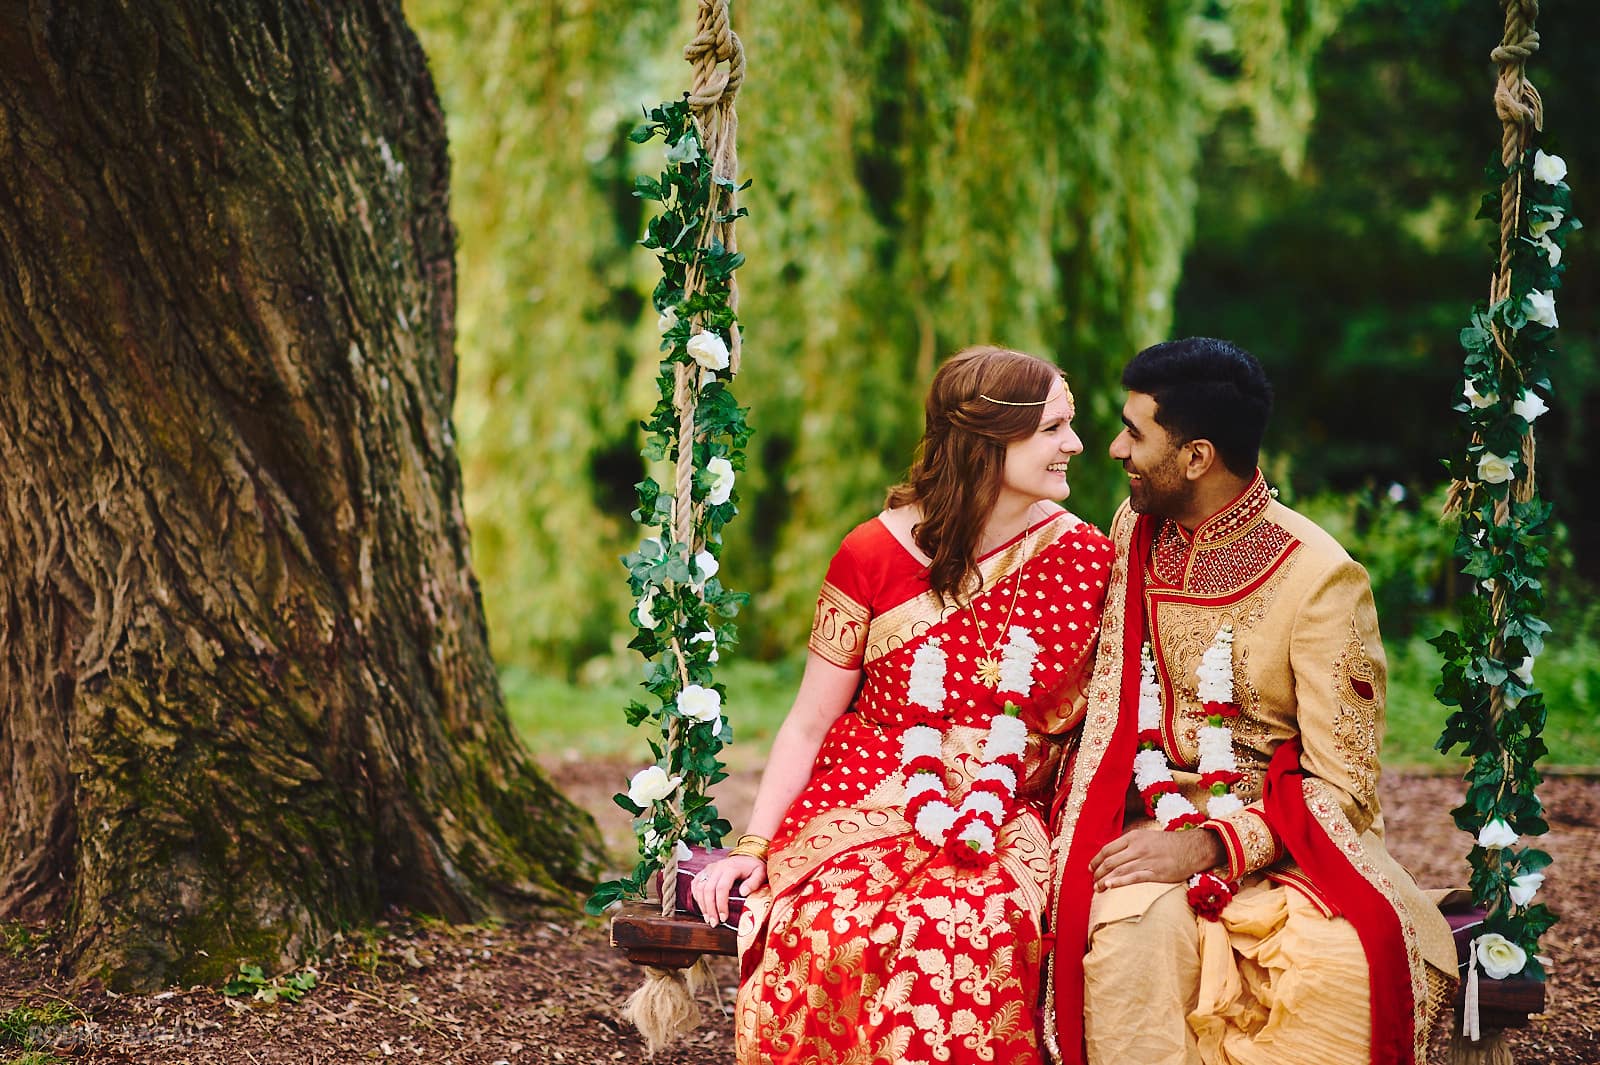 Bride and groom sitting on swing dresses in Indian wedding attire